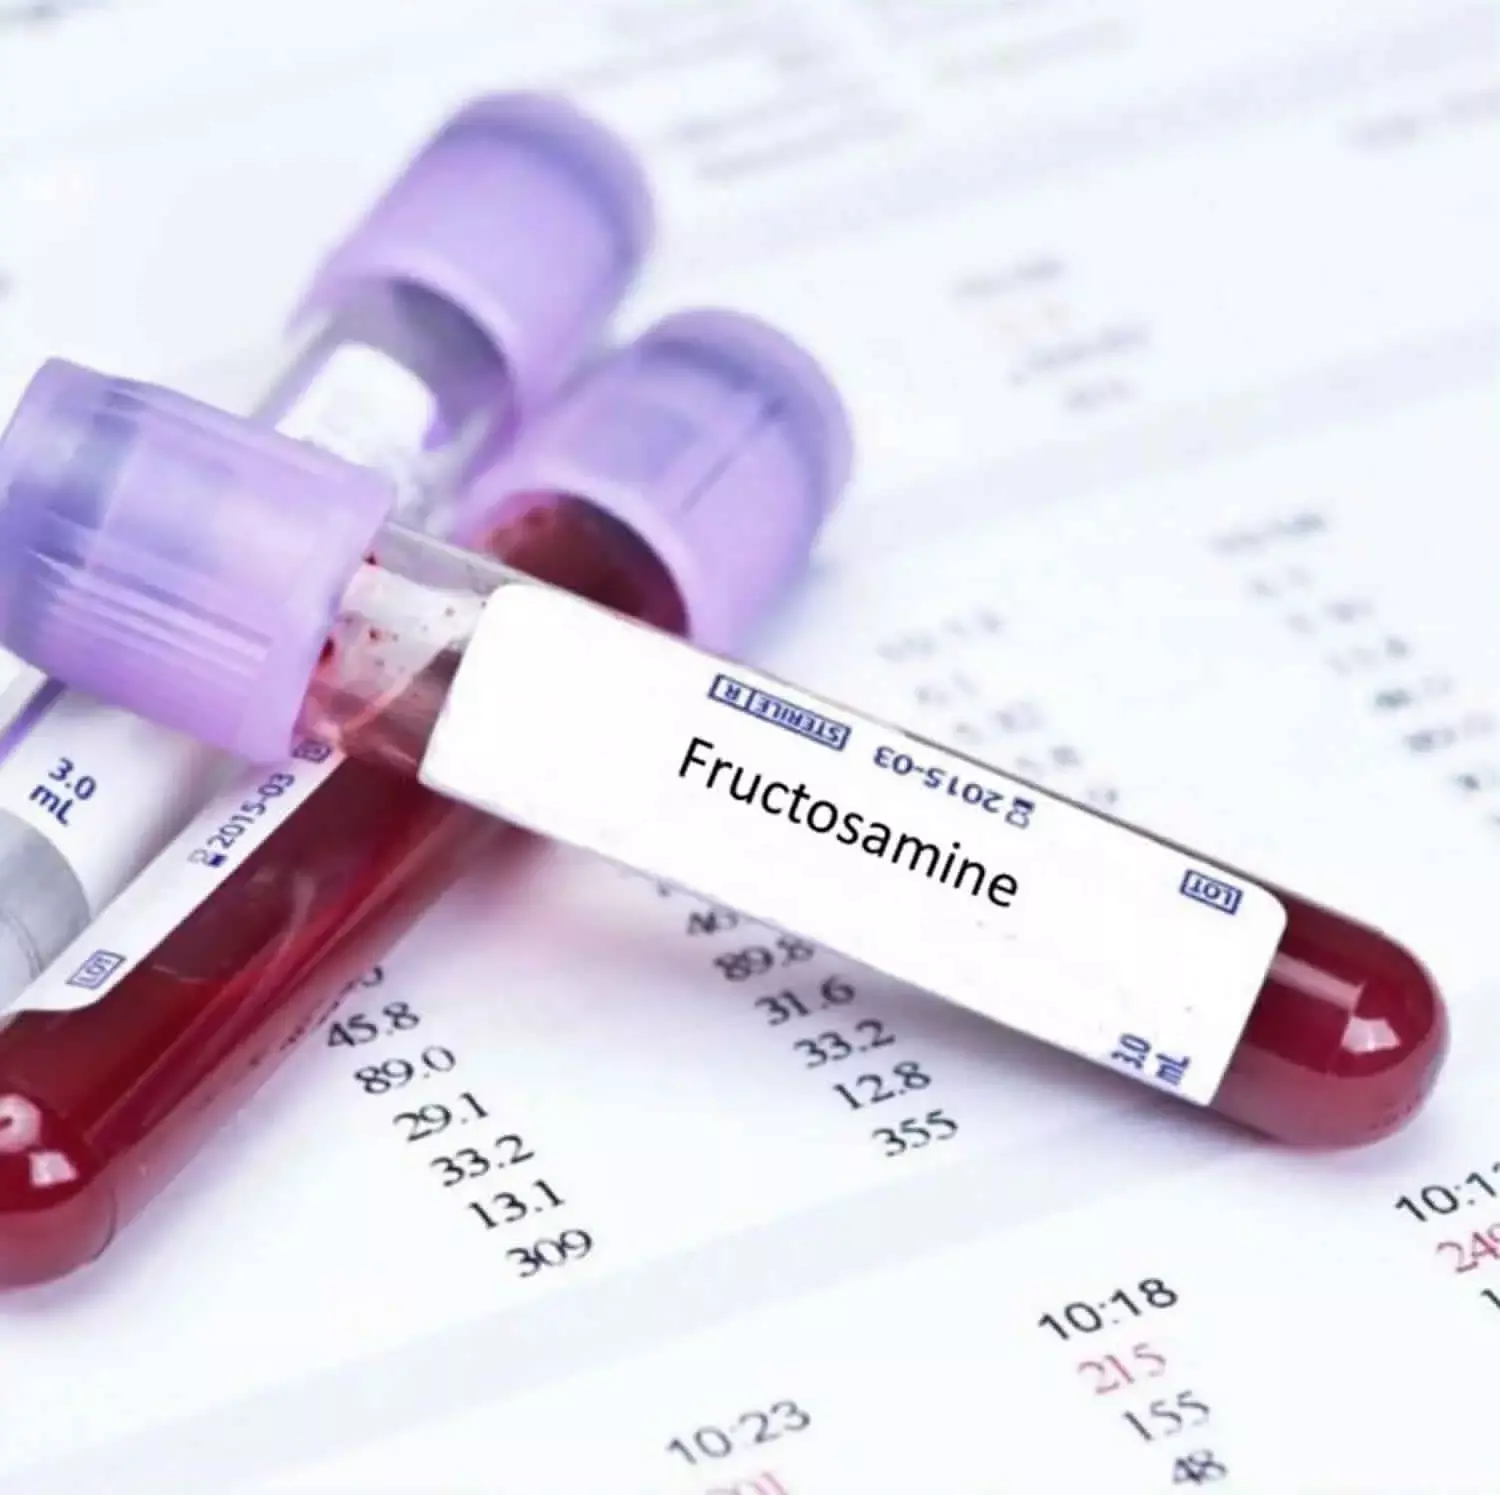 Fructosamine not a reliable Test for Detection of Hyperglycemia